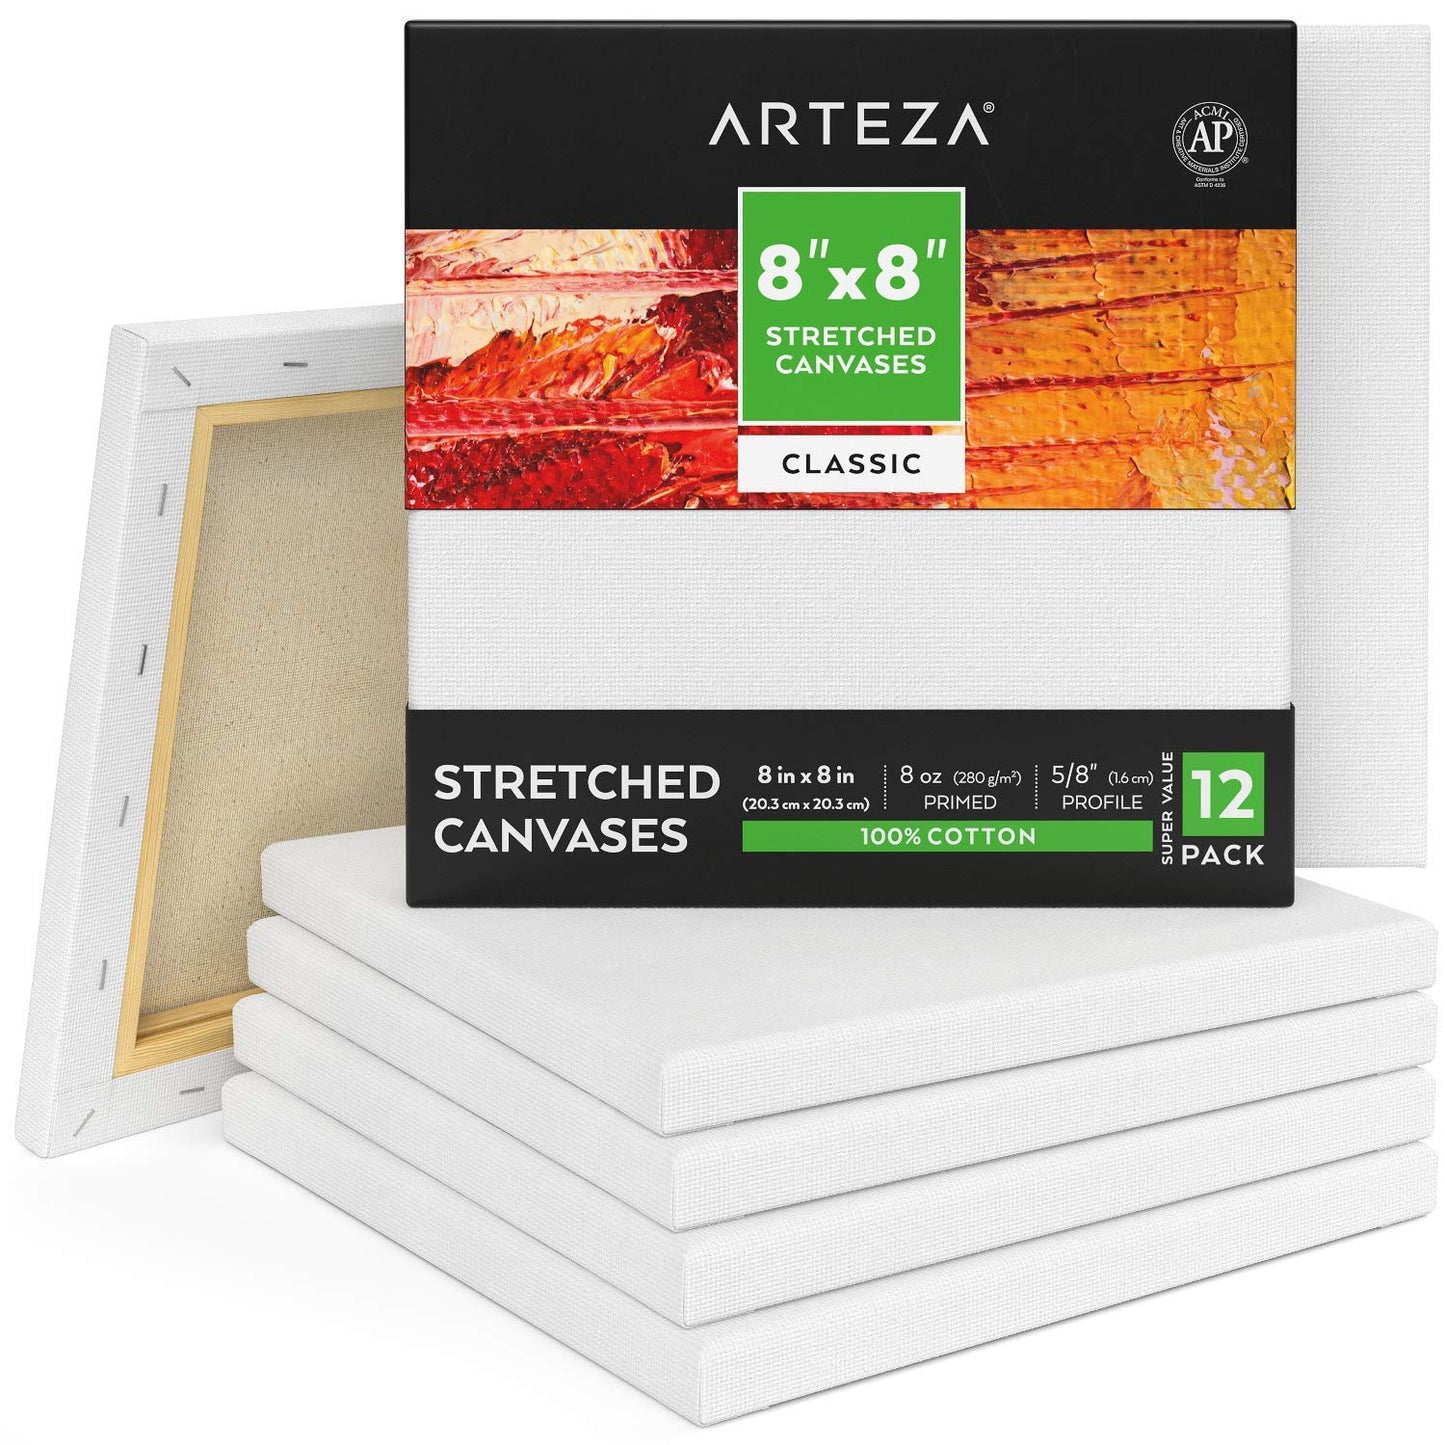 Arteza Classic Stretched Canvas, 8" x 8" - Pack of 12